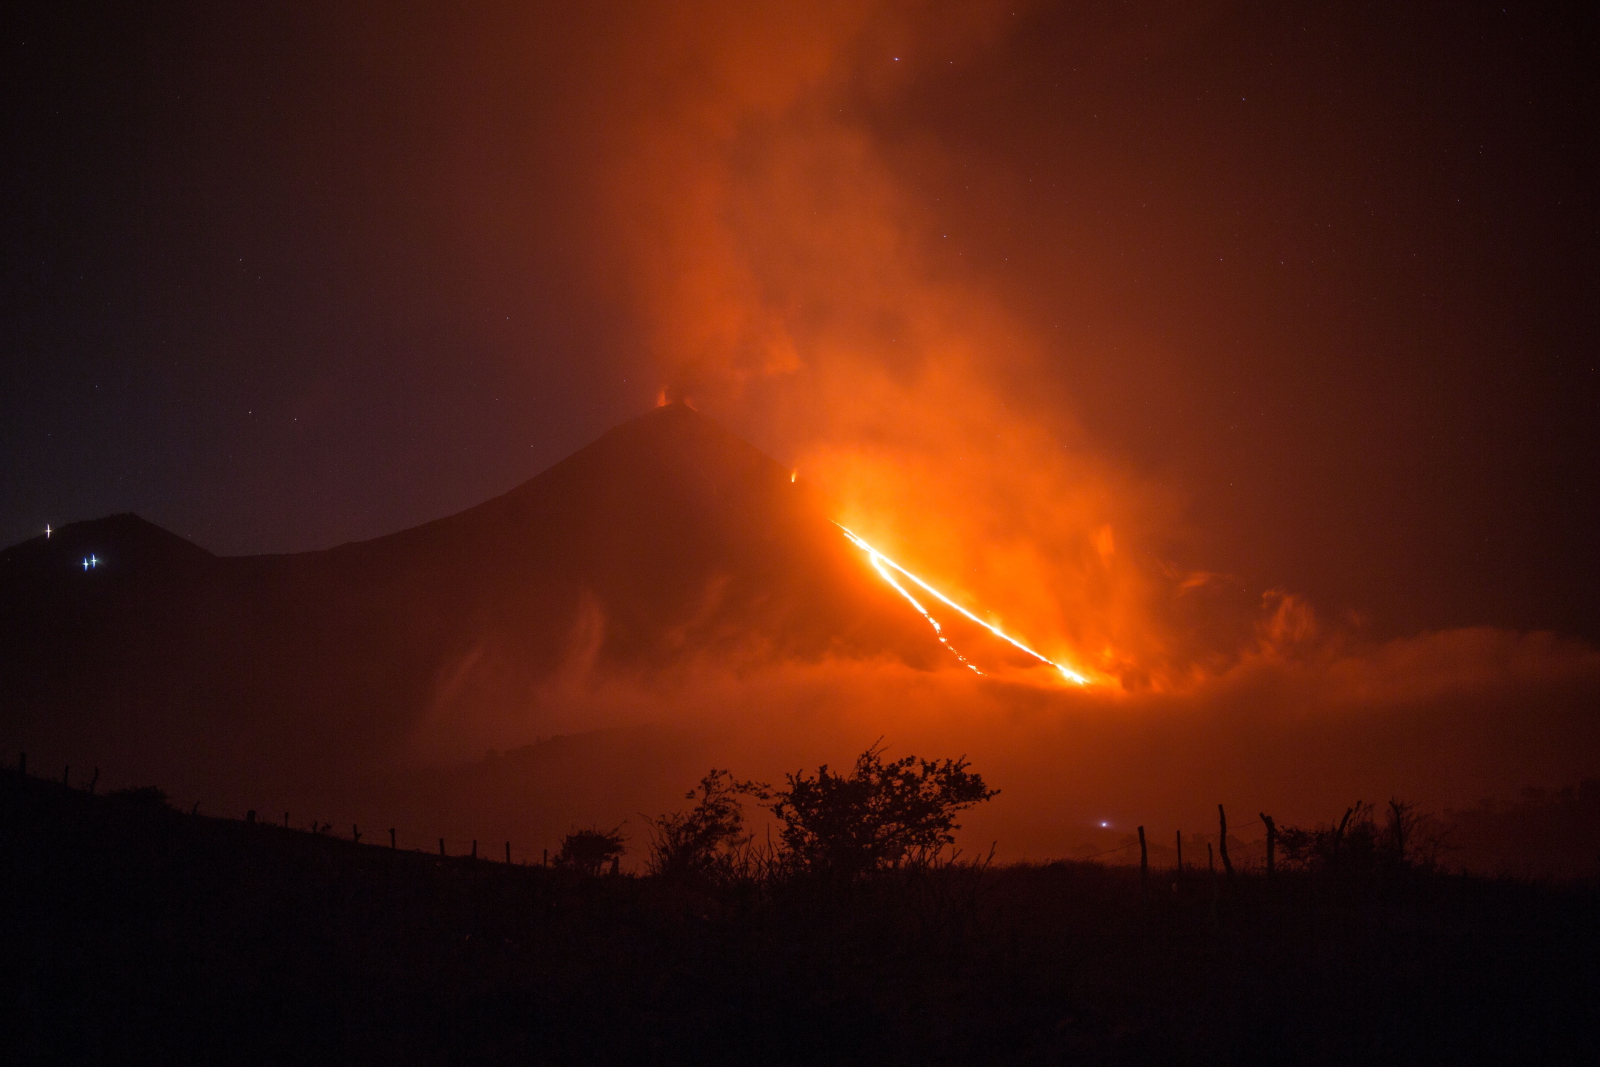 epa08997831 A general view of the Pacaya volcano expelling molten lava seen from the village of El Rodeo, in Escuintla, Guatemala, 08 February 2021. The volcano has increased its activity in recent days with explosions and rivers of lava on its slopes.  EPA/Esteban Biba 
Dostawca: PAP/EPA.